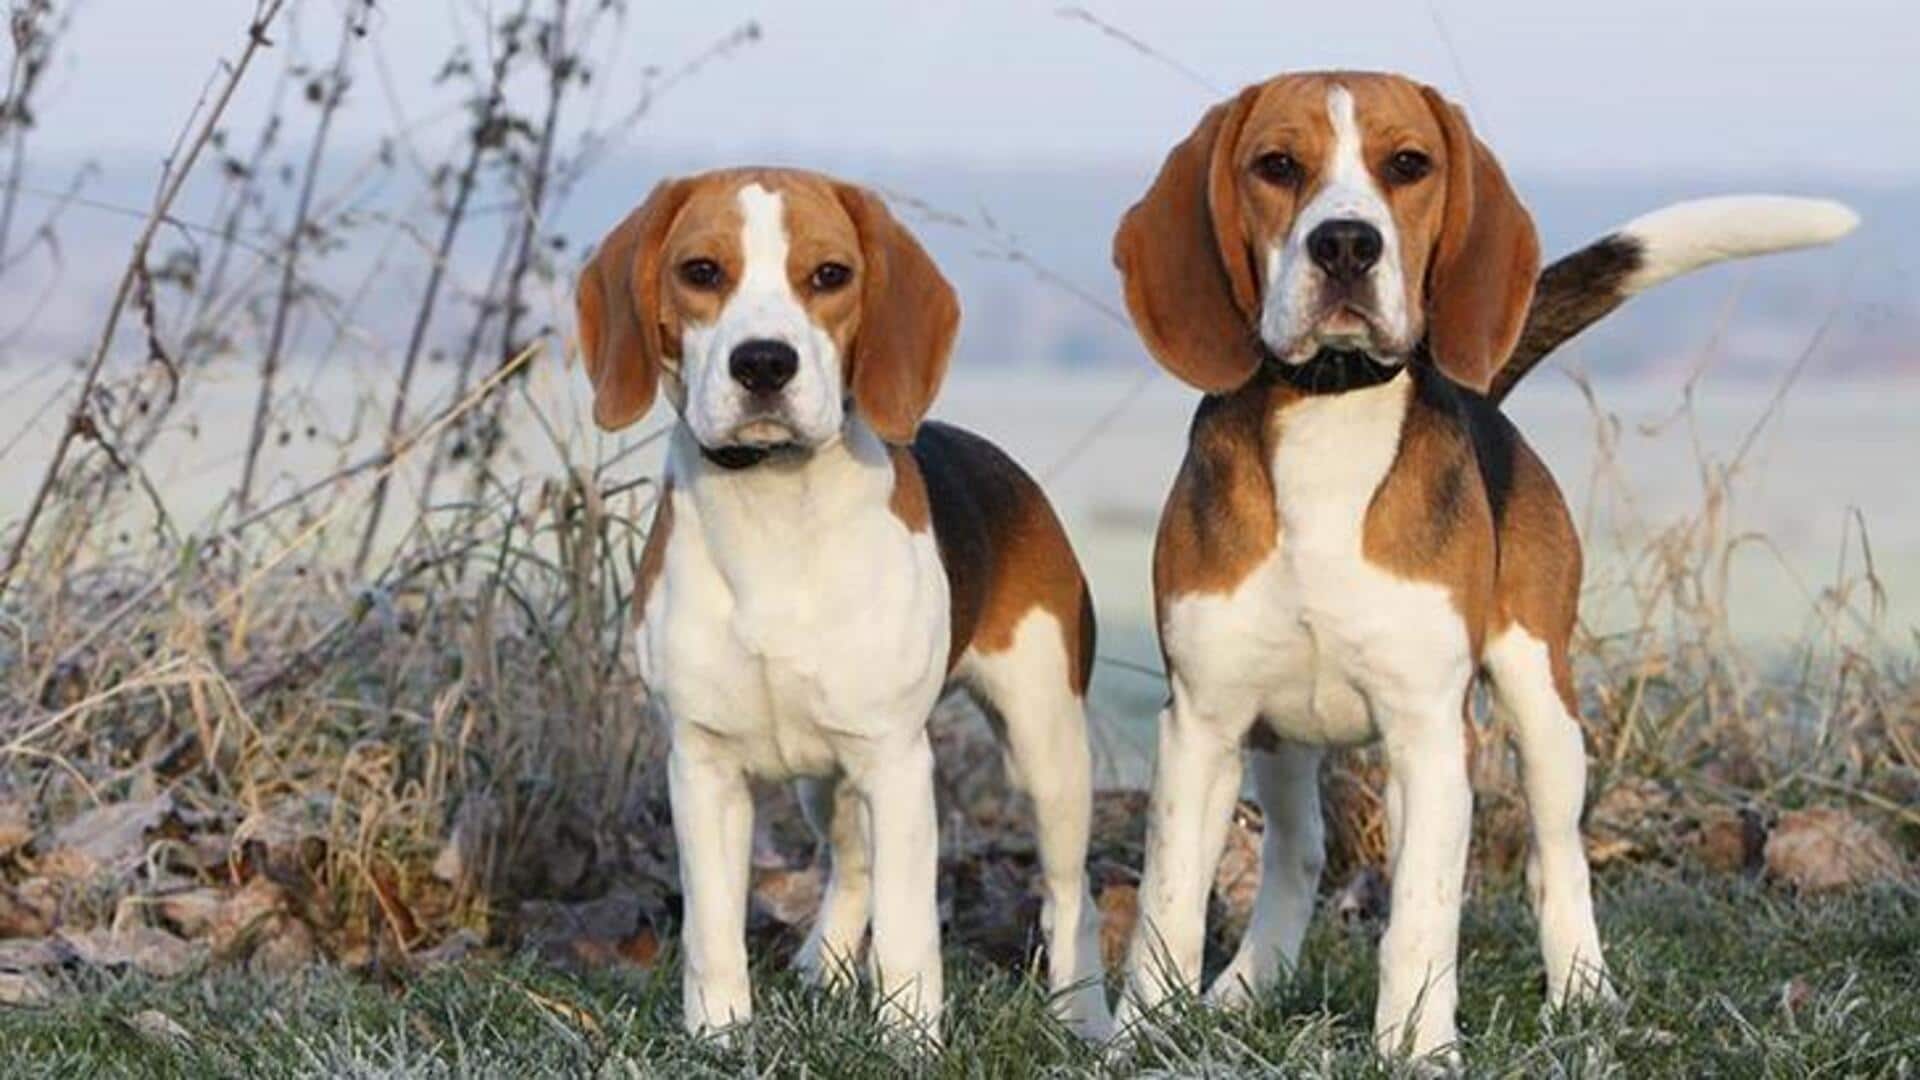 Got a Beagle at home? Follow these care tips